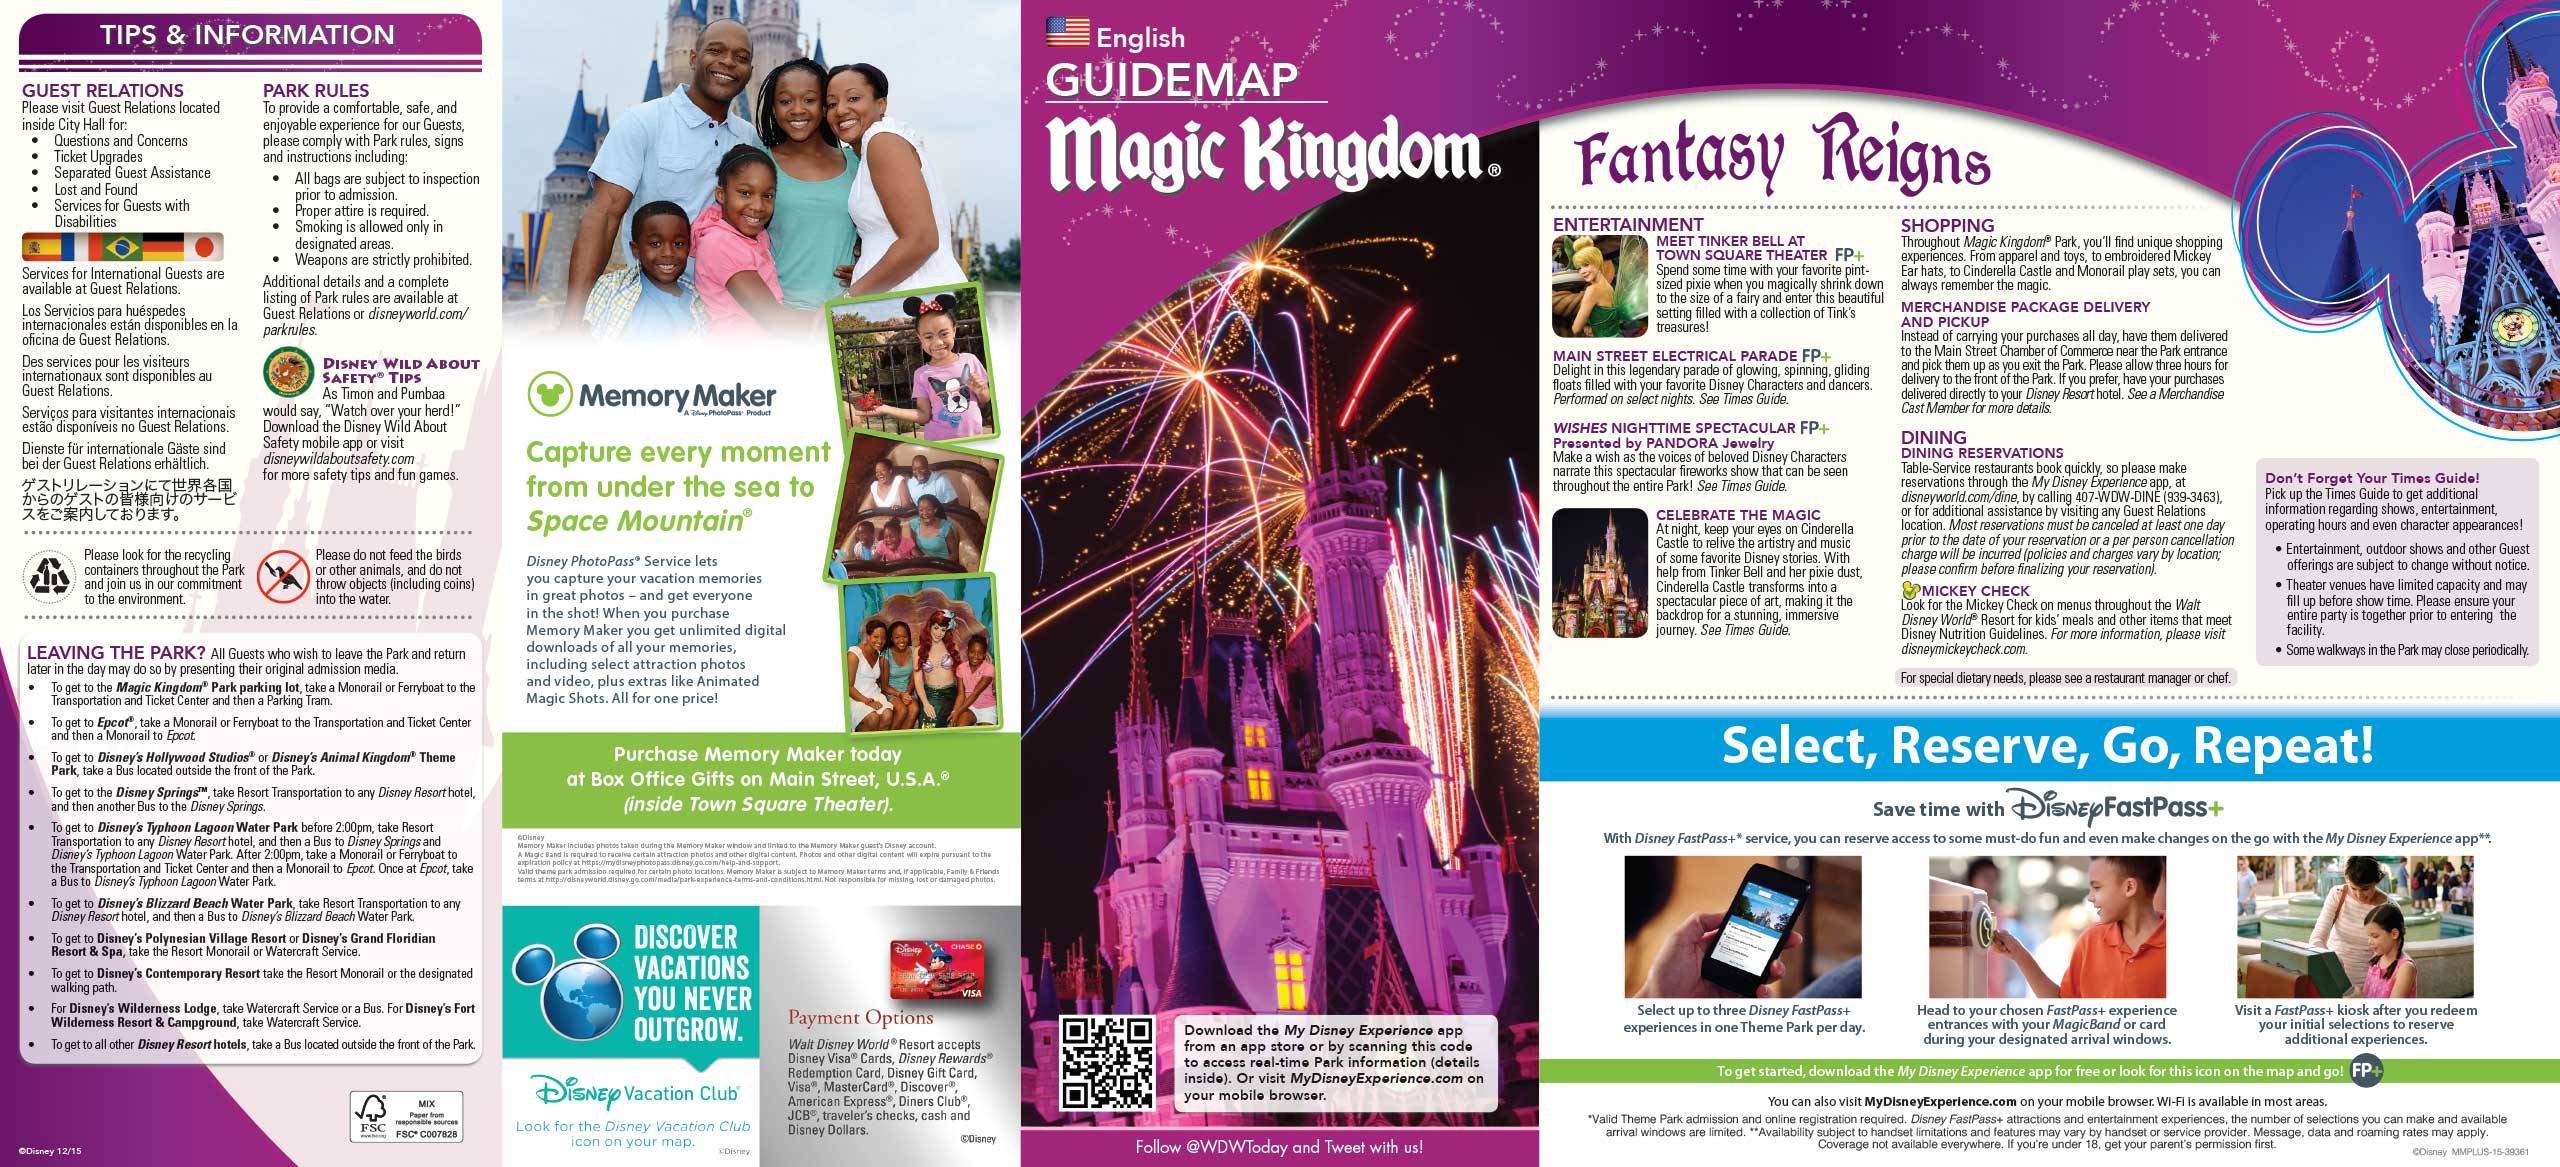 Magic Kingdom Guide Map January 2016 - Front